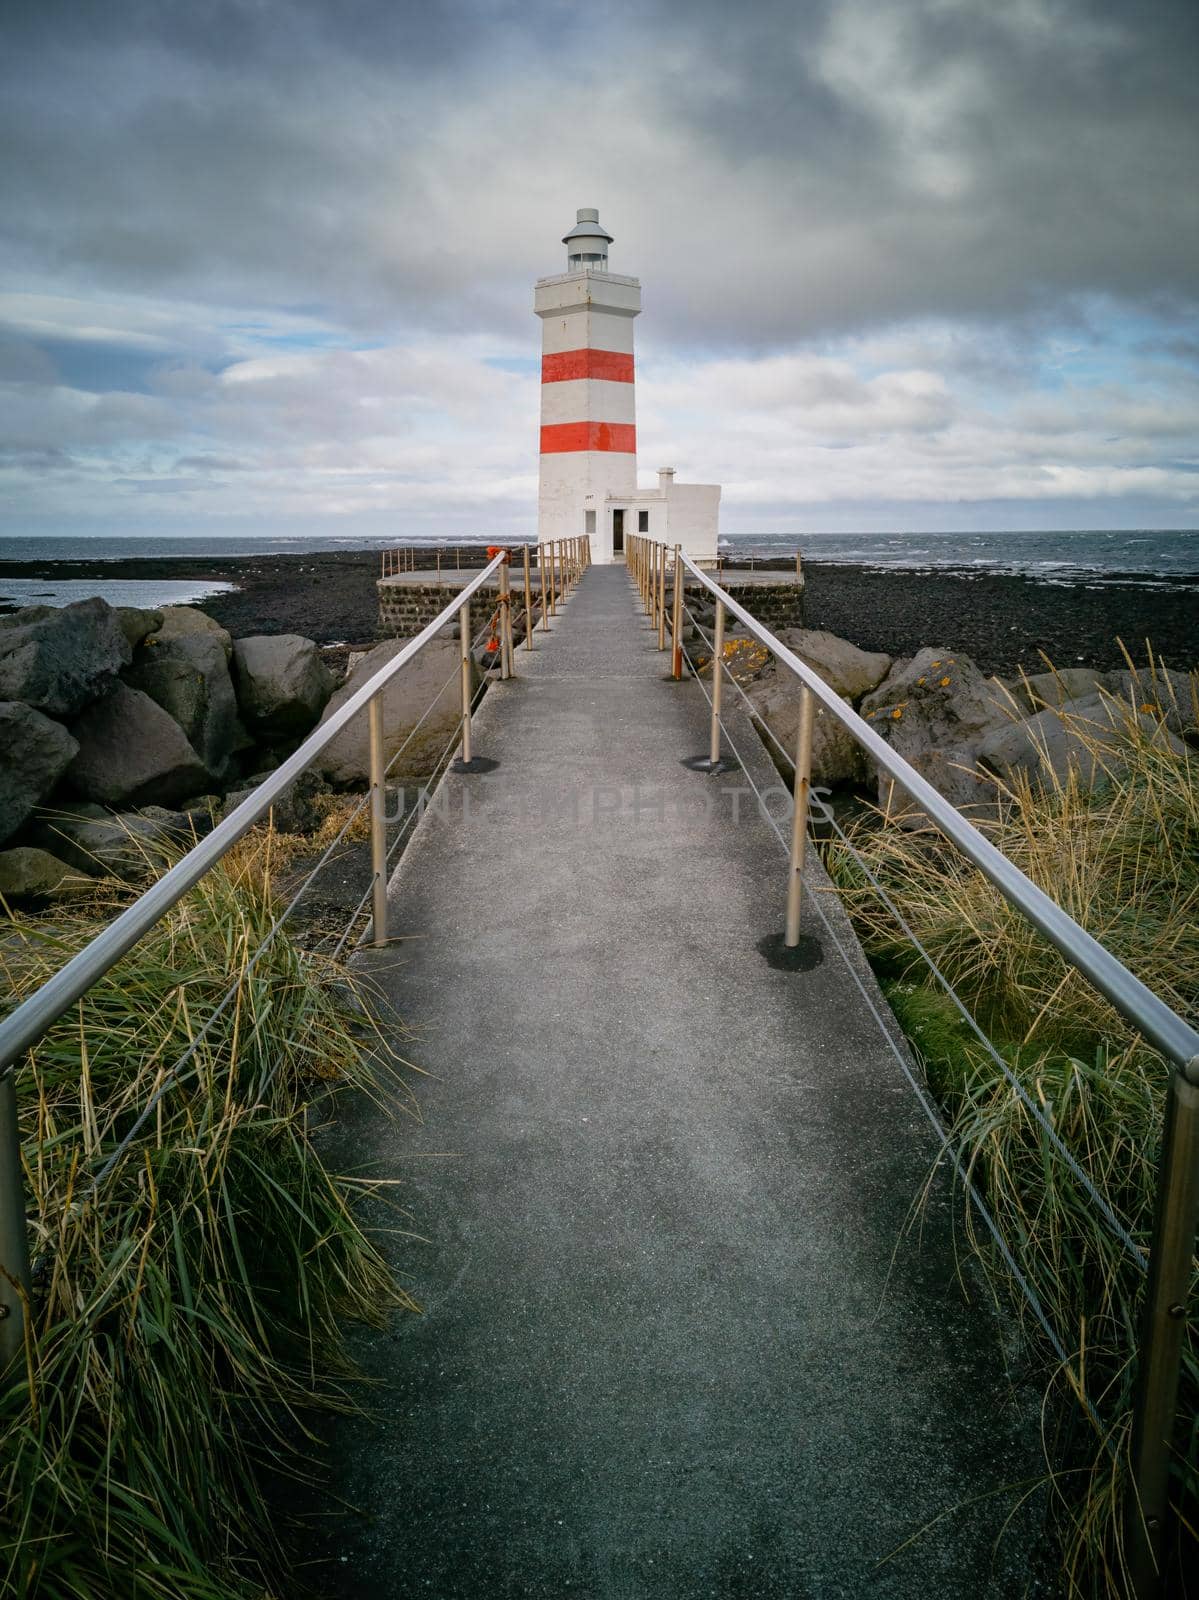 Lighthouse and path under cloudy day and low tide by FerradalFCG